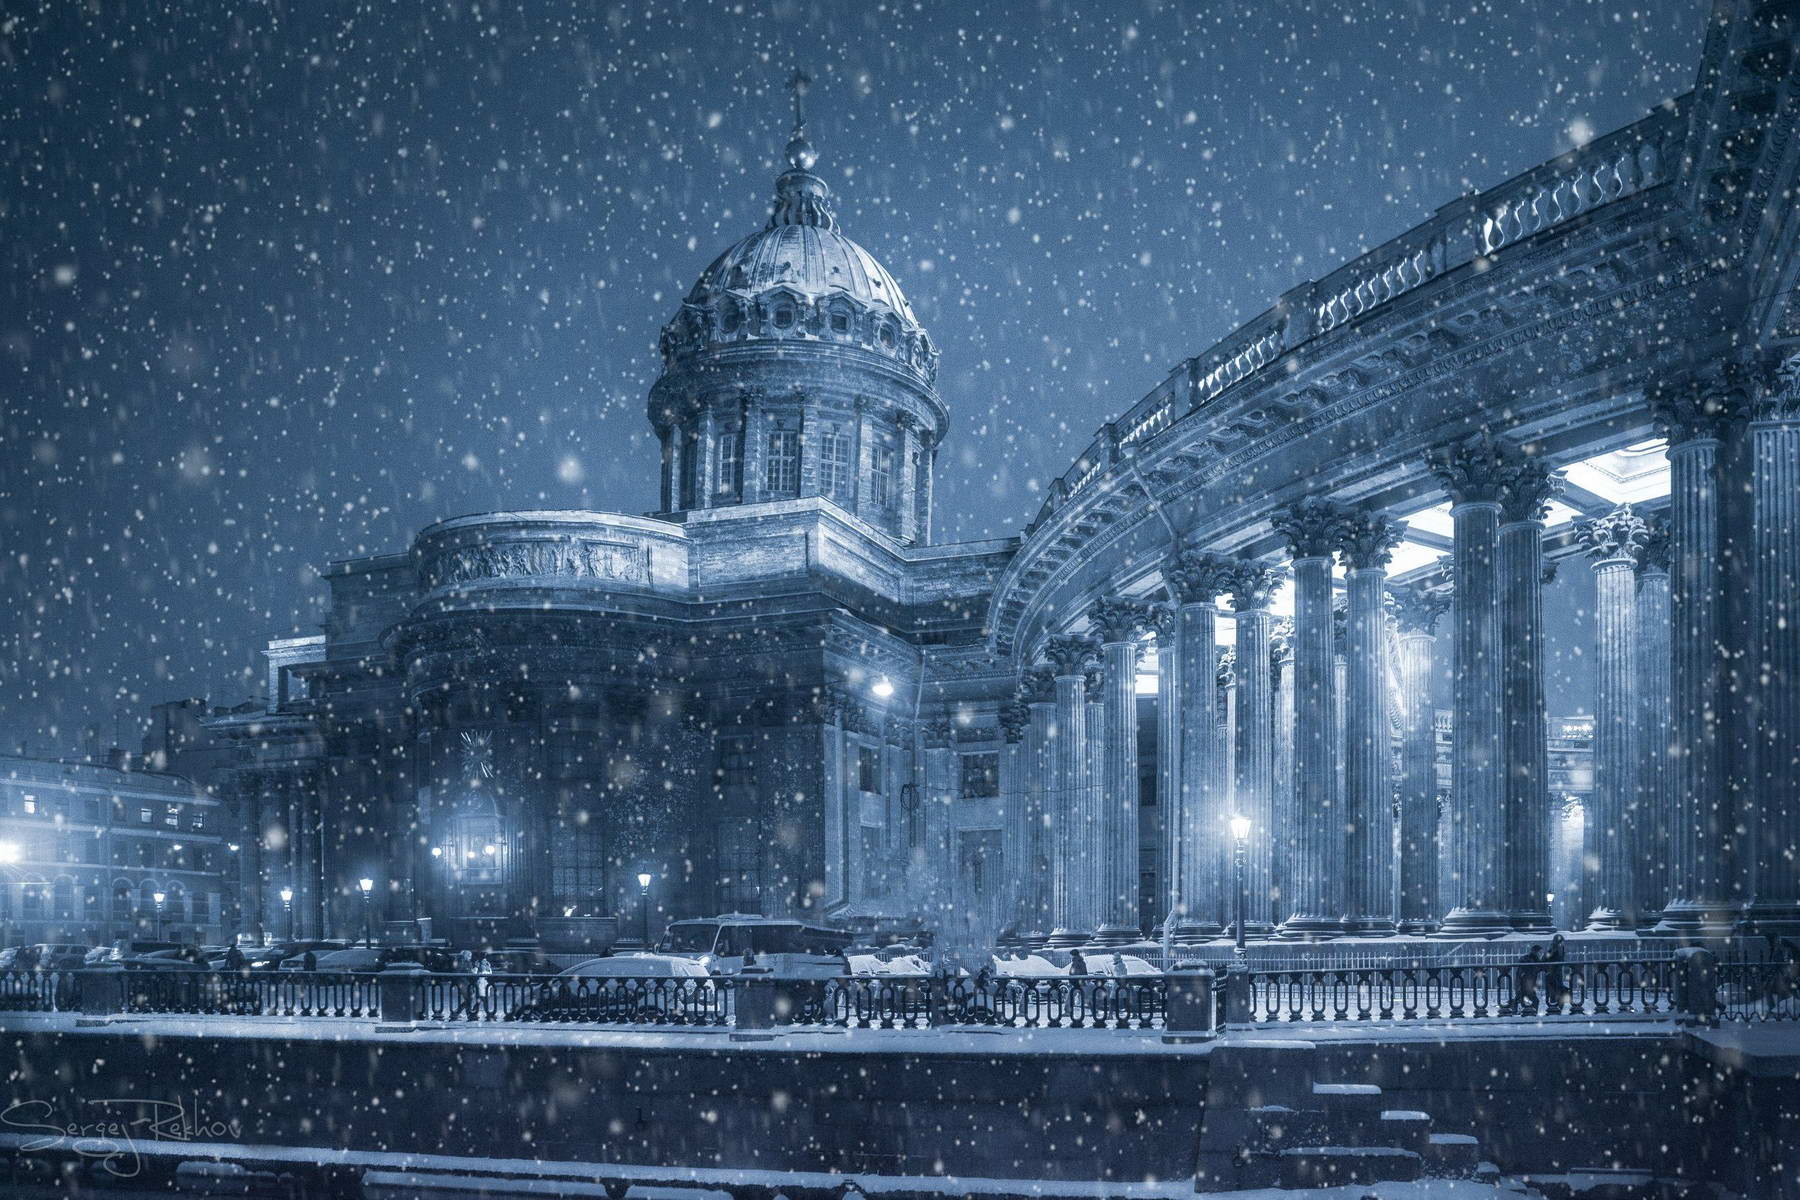 The Kazan Cathedral in snowfall